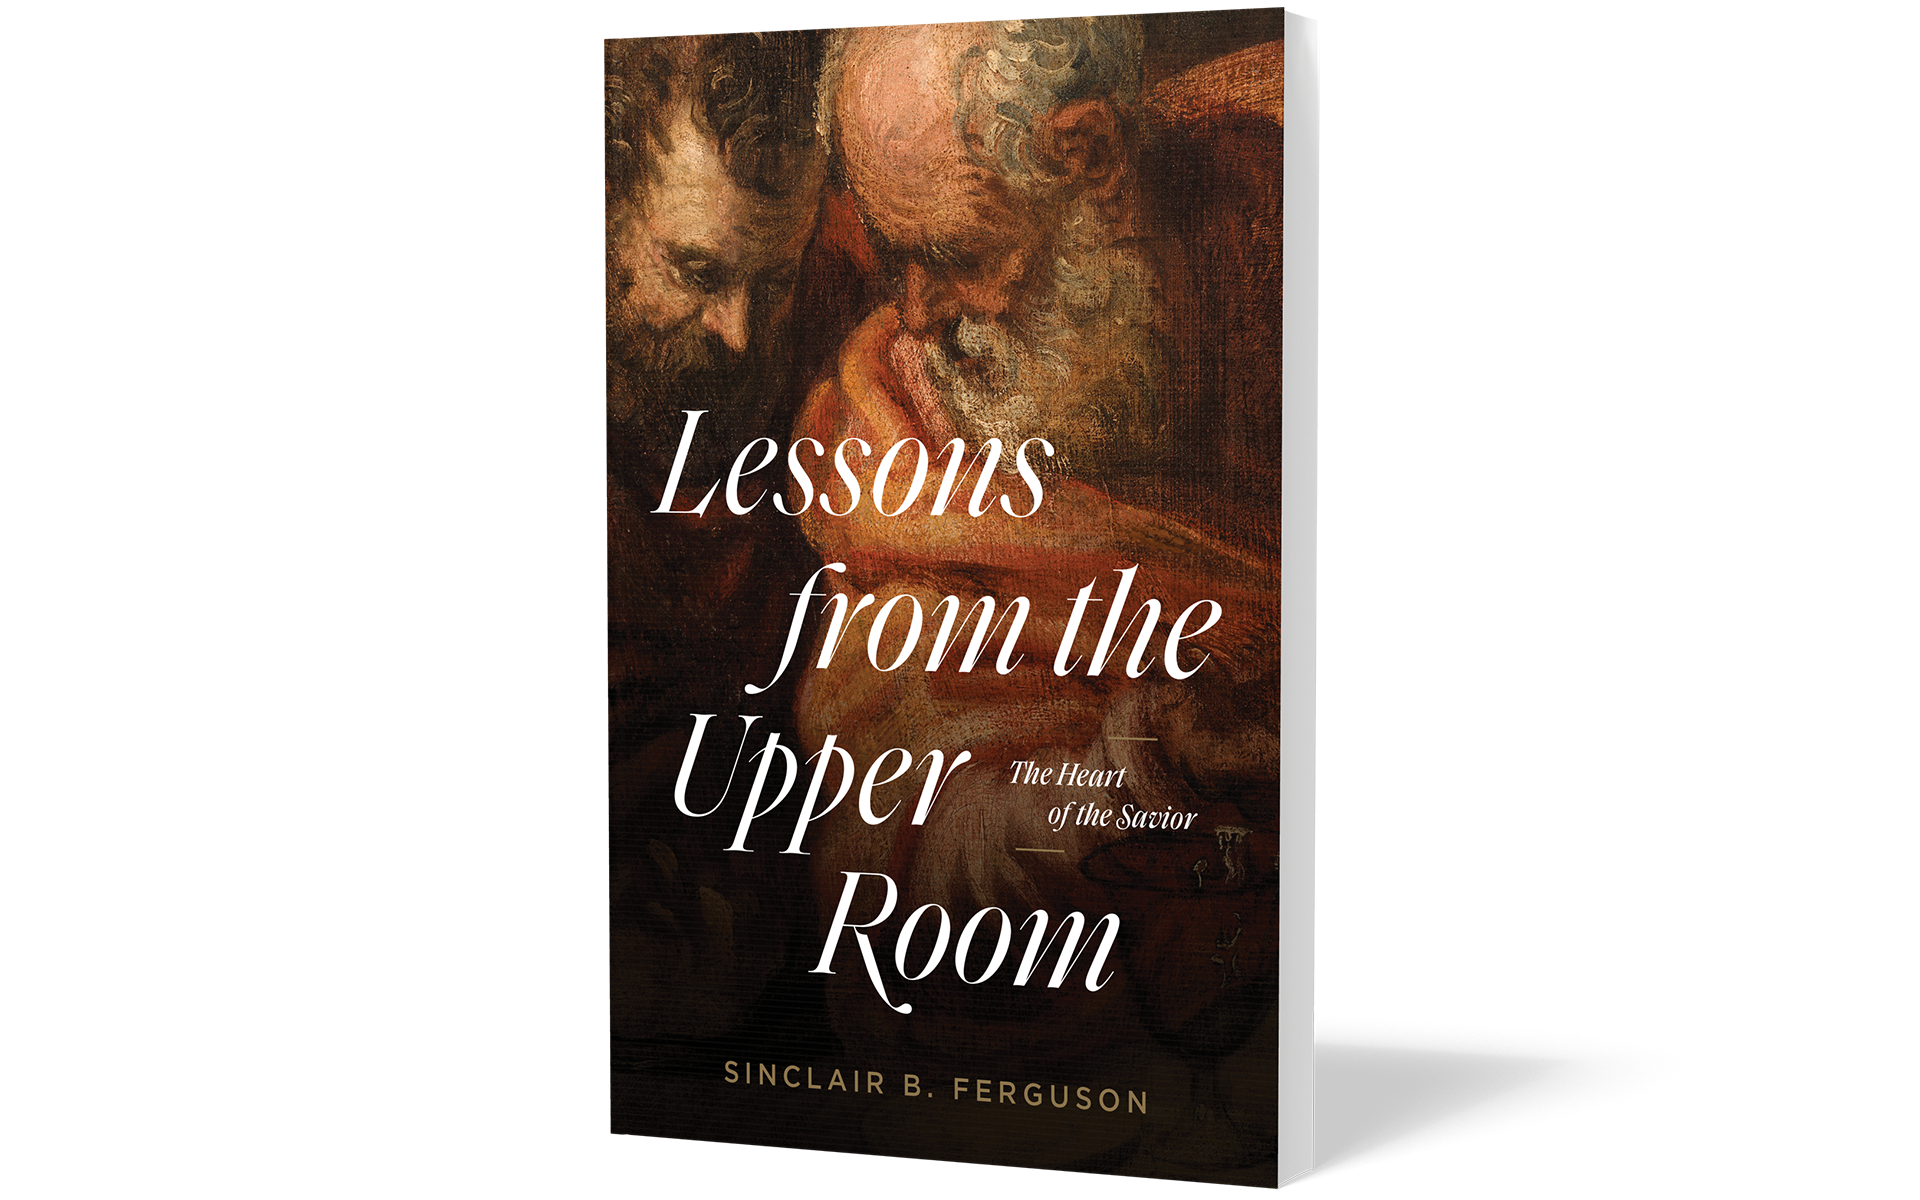 Lessons from the Upper Room: The Heart of the Savior